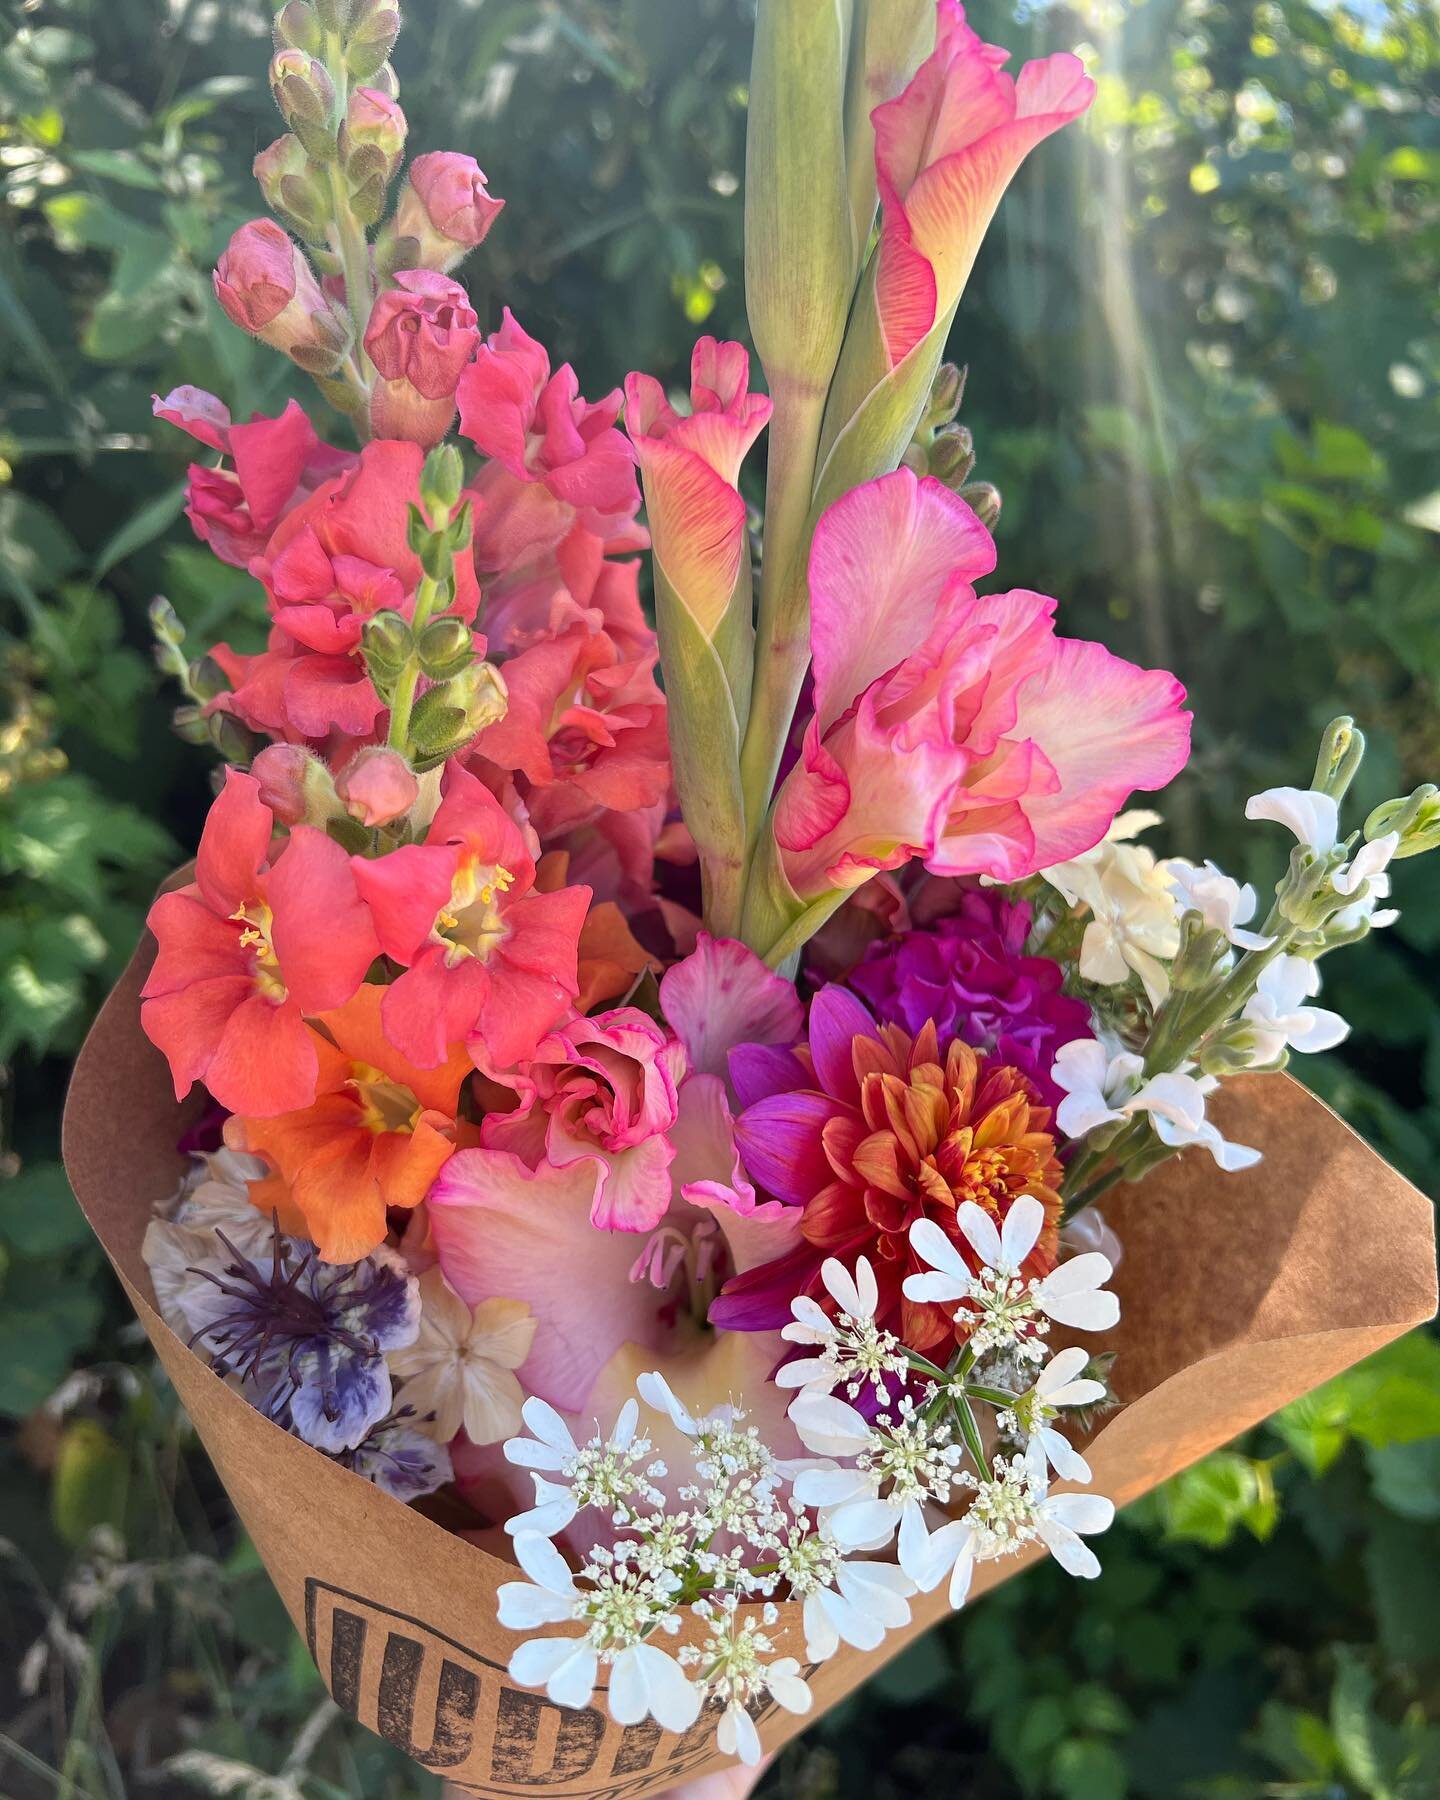 💐FLOWER STAND PREVIEW💐

The stand is fully stocked today, and here are just a few of the bouquets you can find. They&rsquo;re loaded with gladiolus, snapdragons, and we have dahlias, zinnias, and nigella sprinkled in. 

Cash, Venmo, and PayPal acce